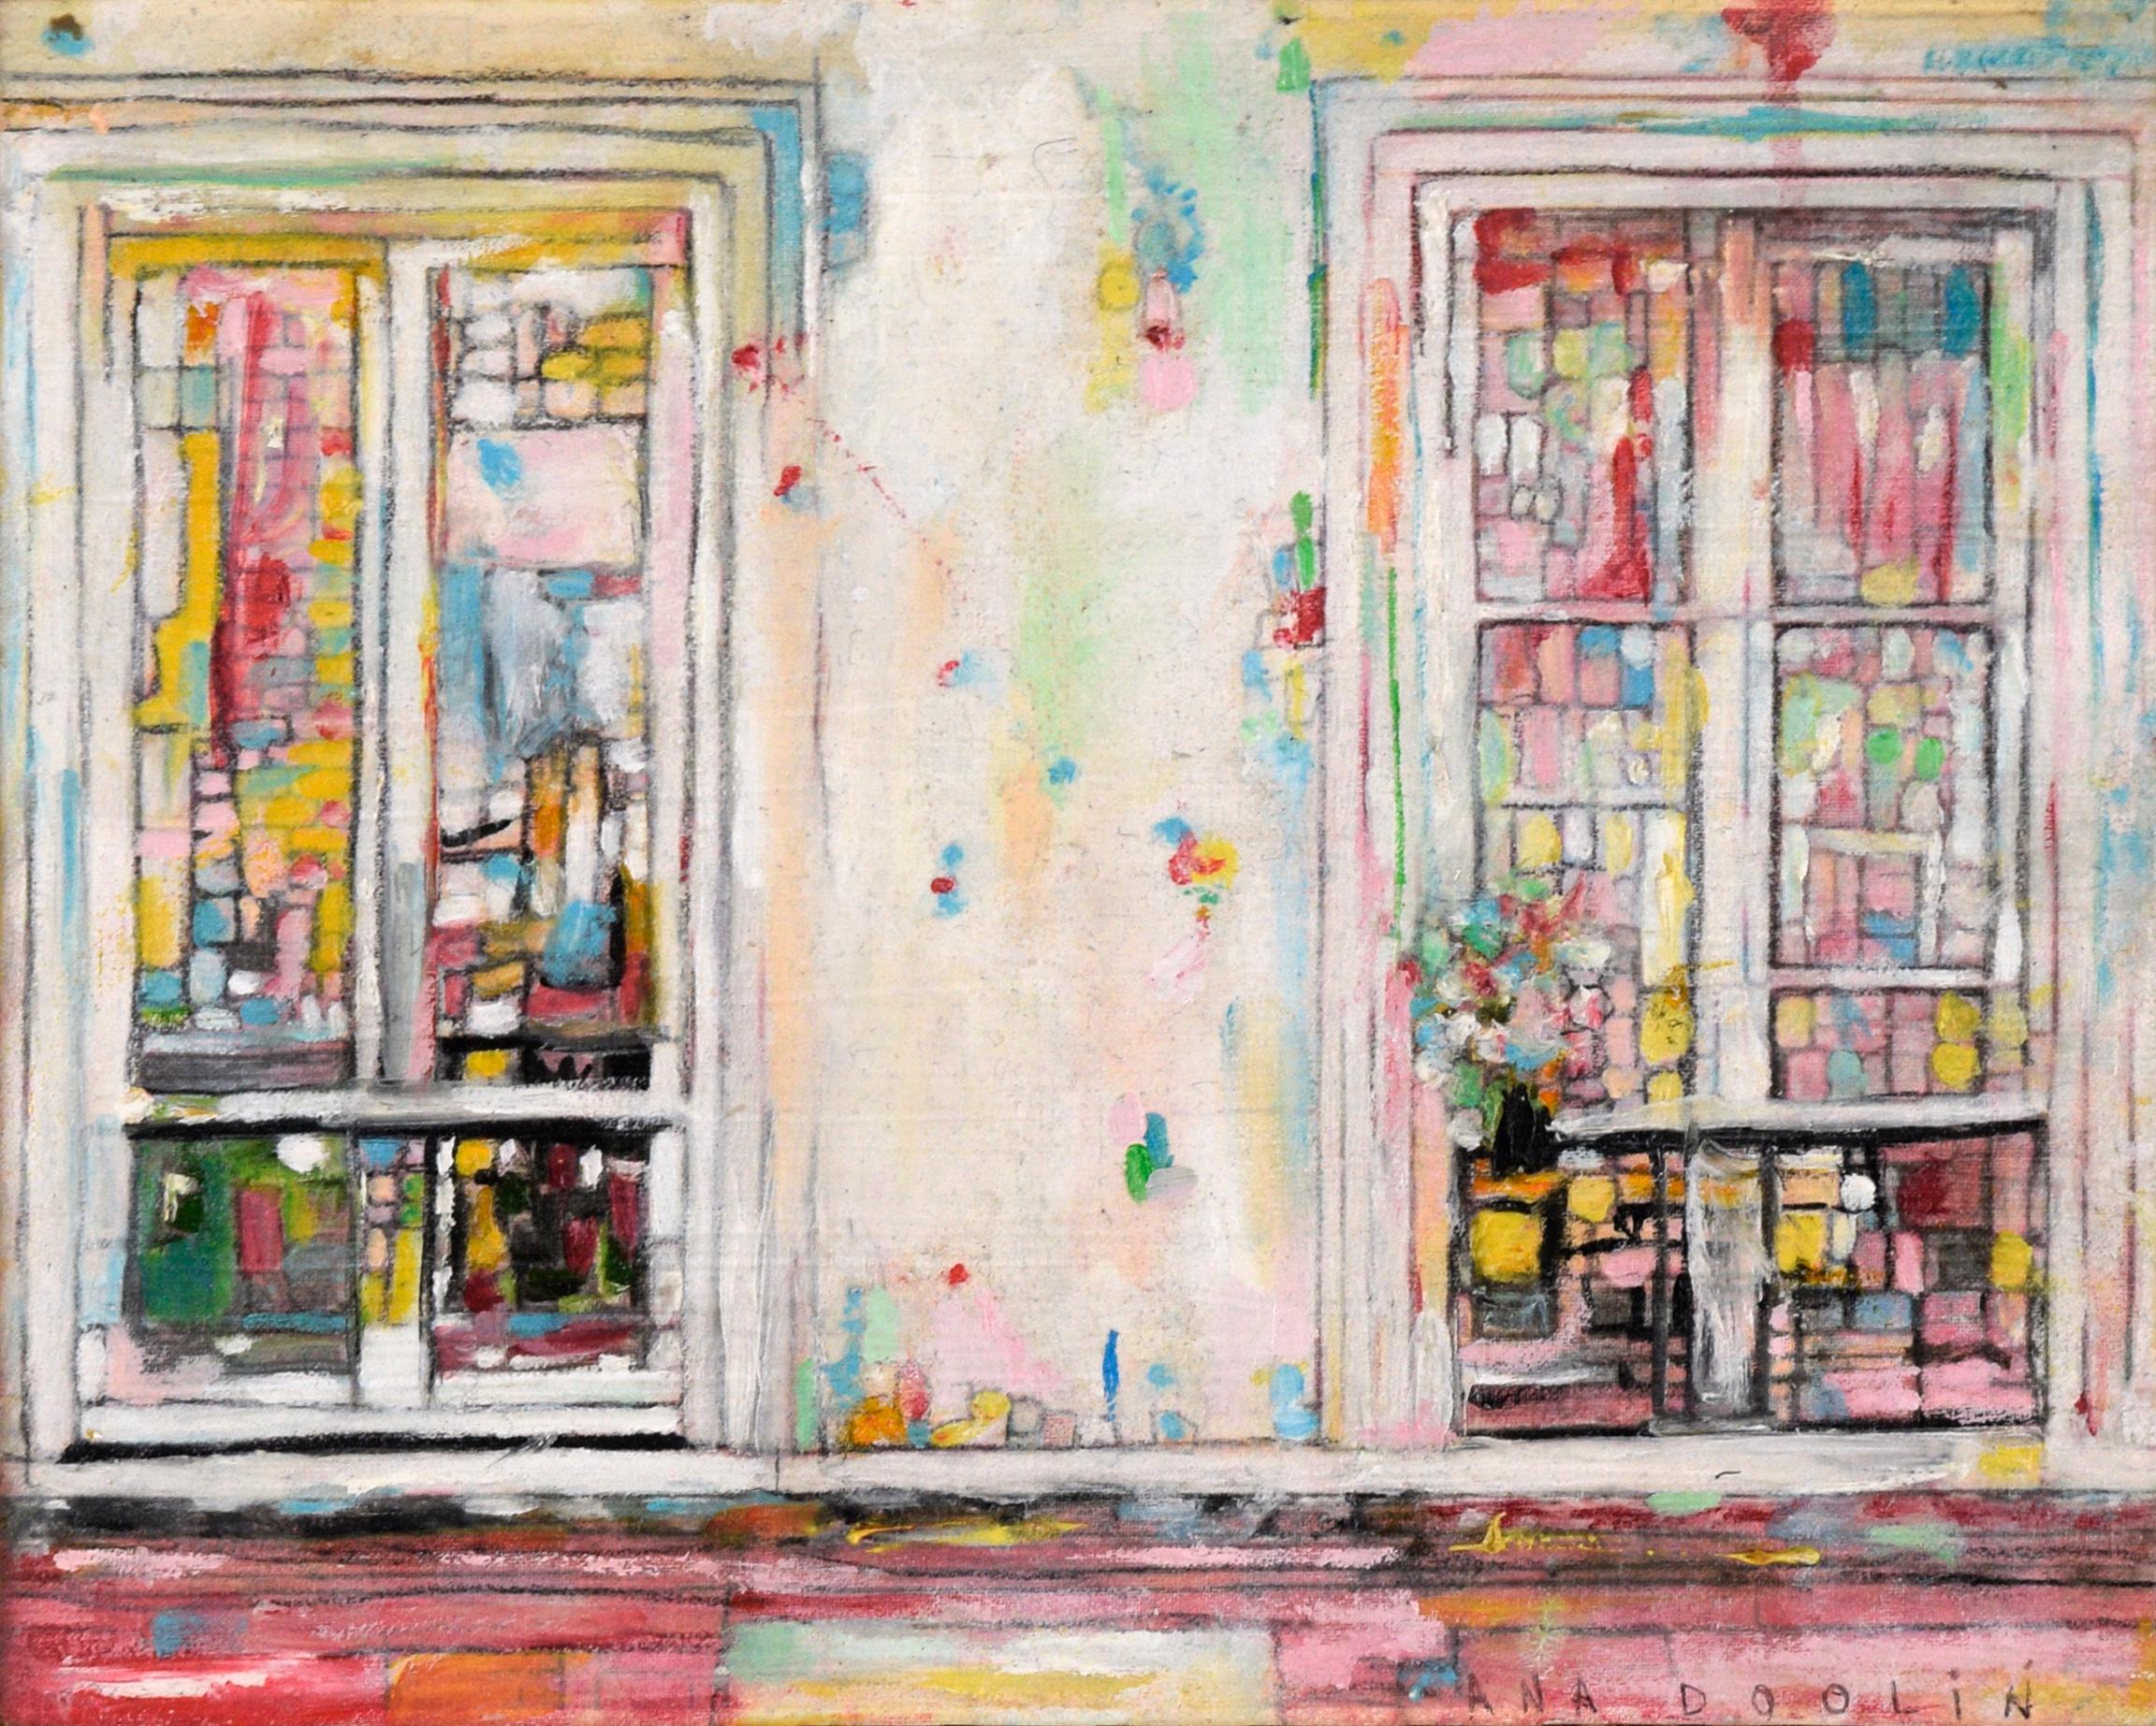 Portuguese Windows #2 - Painting by Ana Doolin